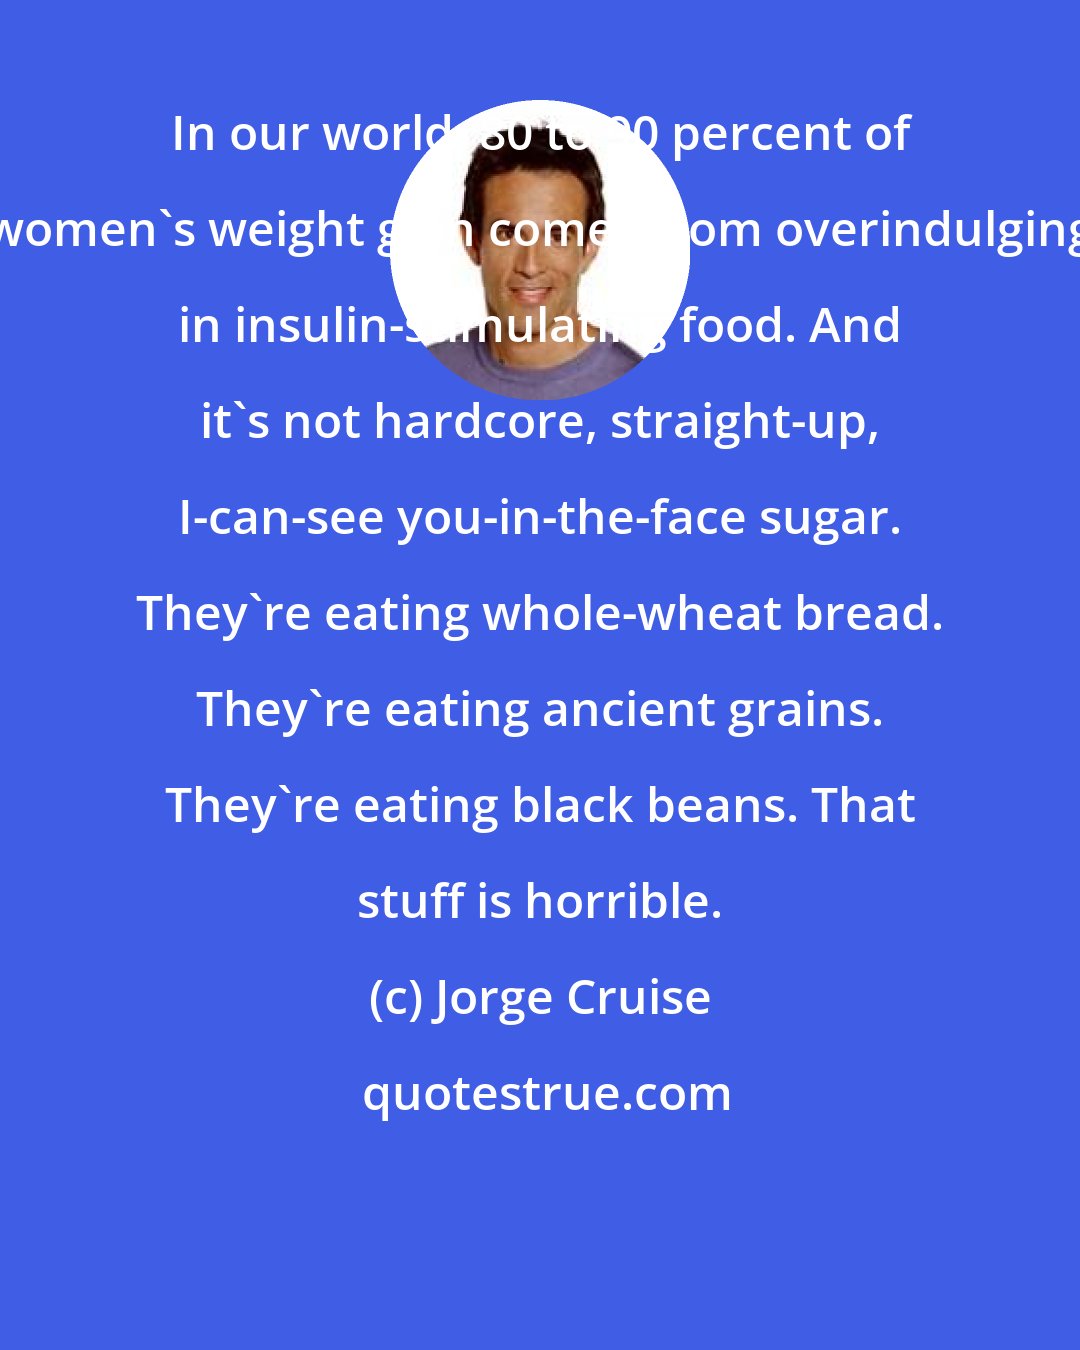 Jorge Cruise: In our world, 80 to 90 percent of women's weight gain comes from overindulging in insulin-stimulating food. And it's not hardcore, straight-up, I-can-see you-in-the-face sugar. They're eating whole-wheat bread. They're eating ancient grains. They're eating black beans. That stuff is horrible.